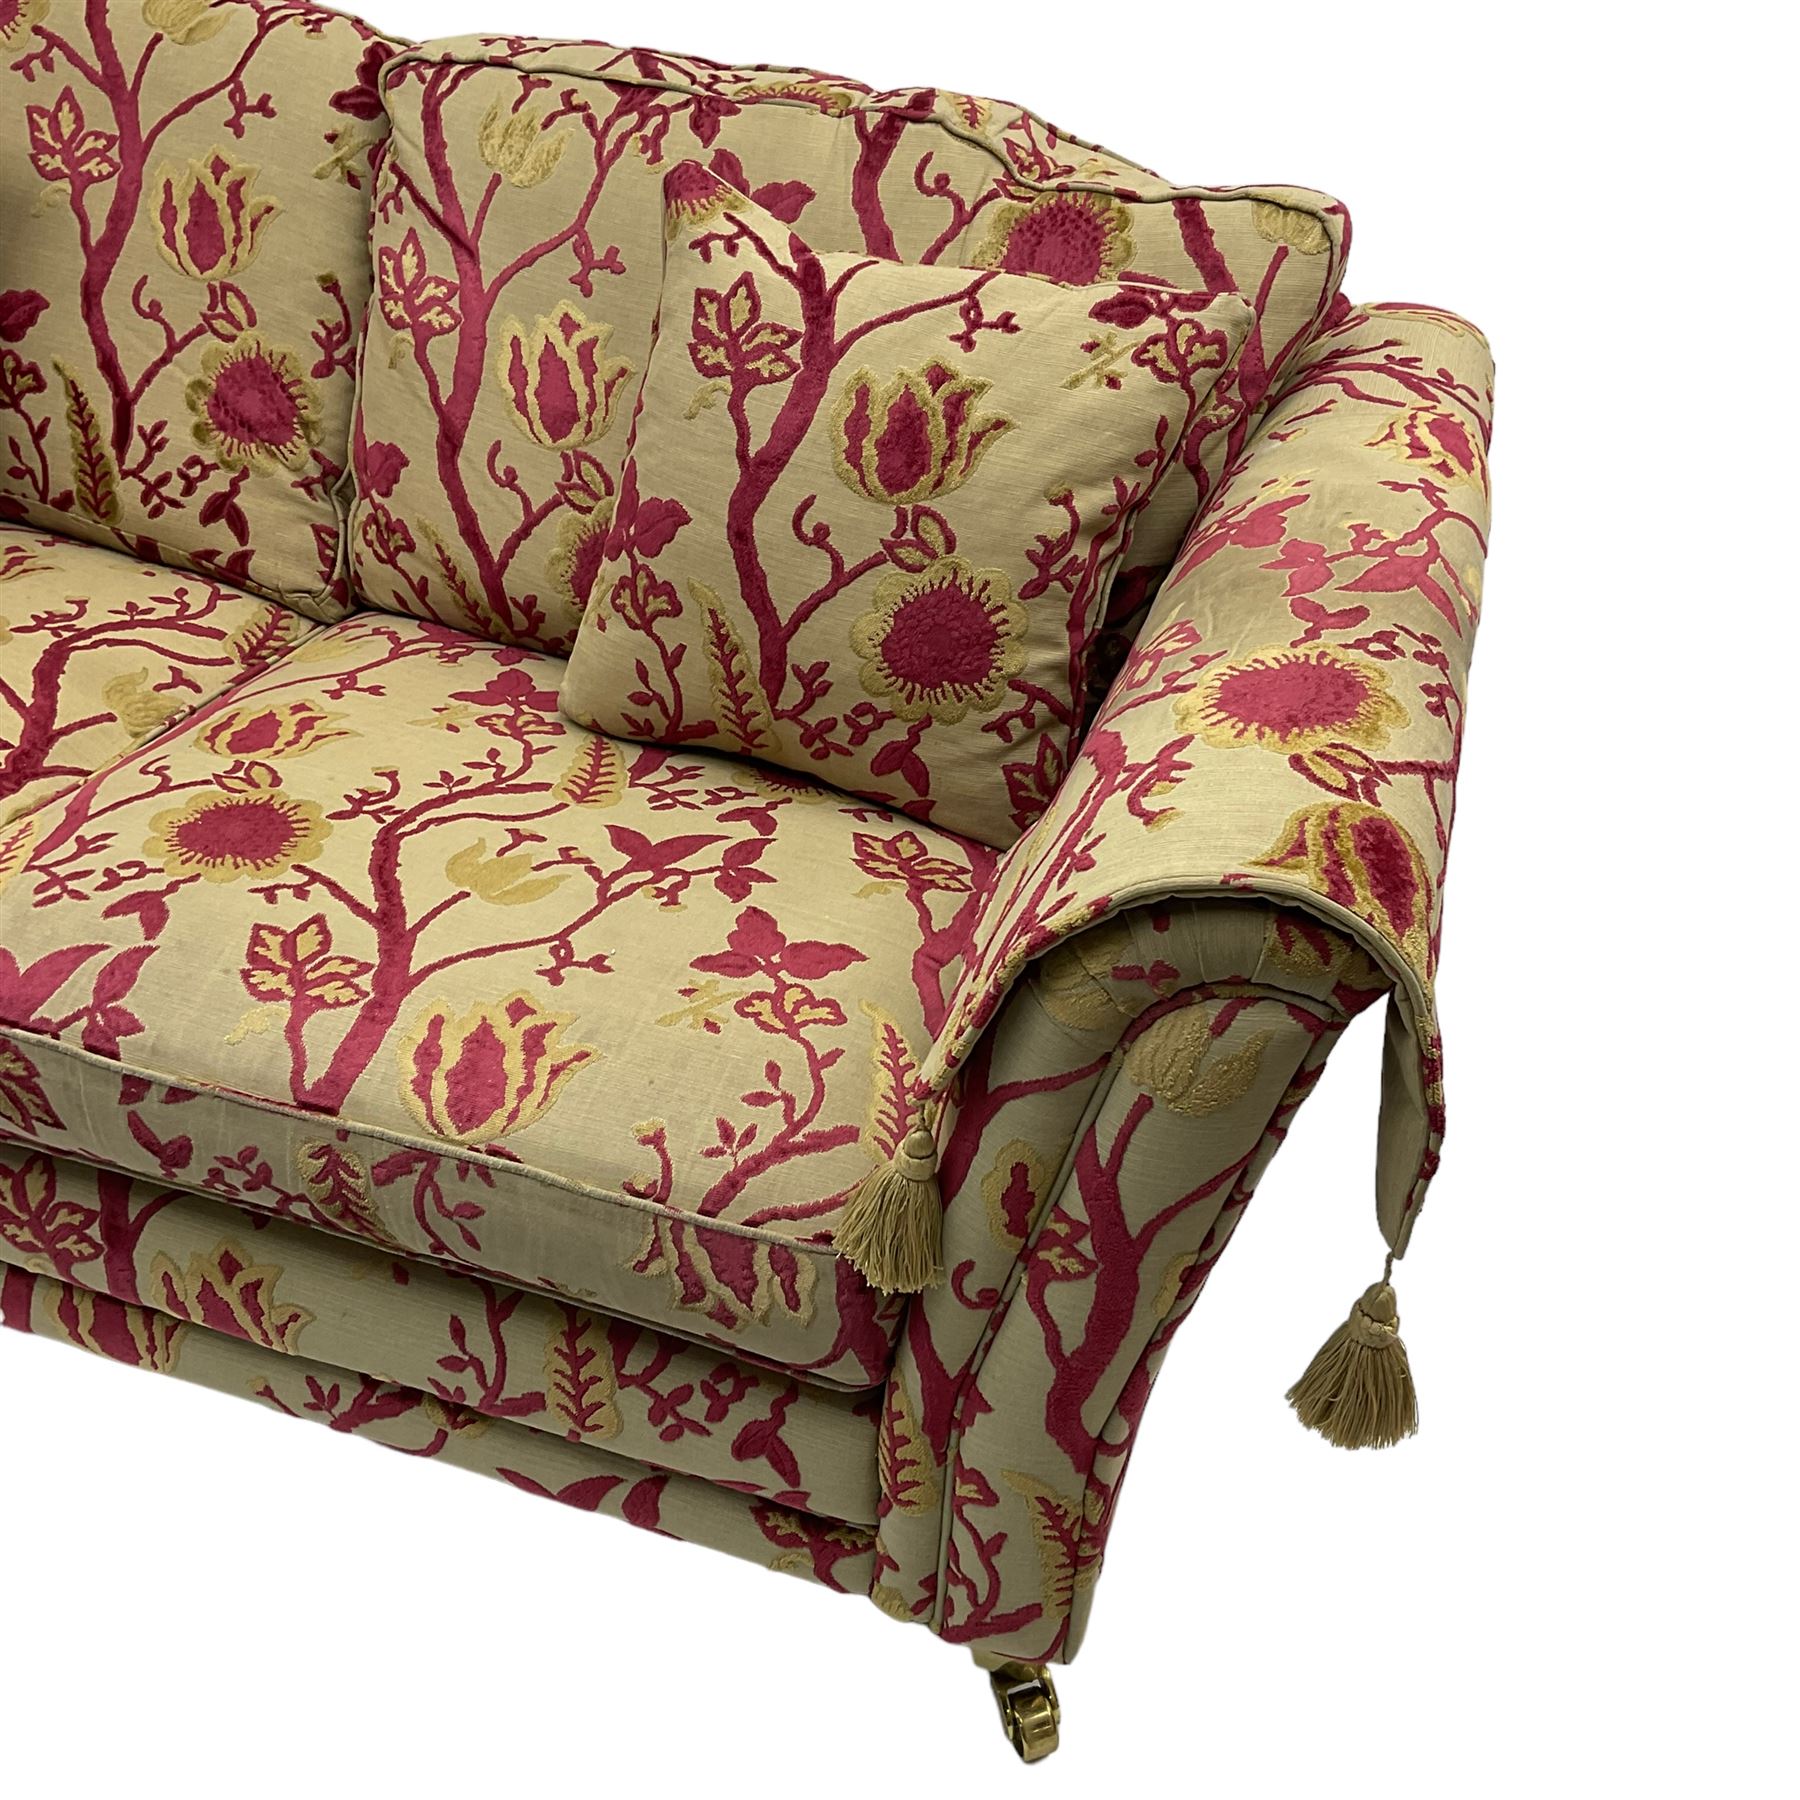 Three-piece lounge suite - large two-seat sofa upholstered in red and gold striped fabric (W185cm - Image 3 of 24